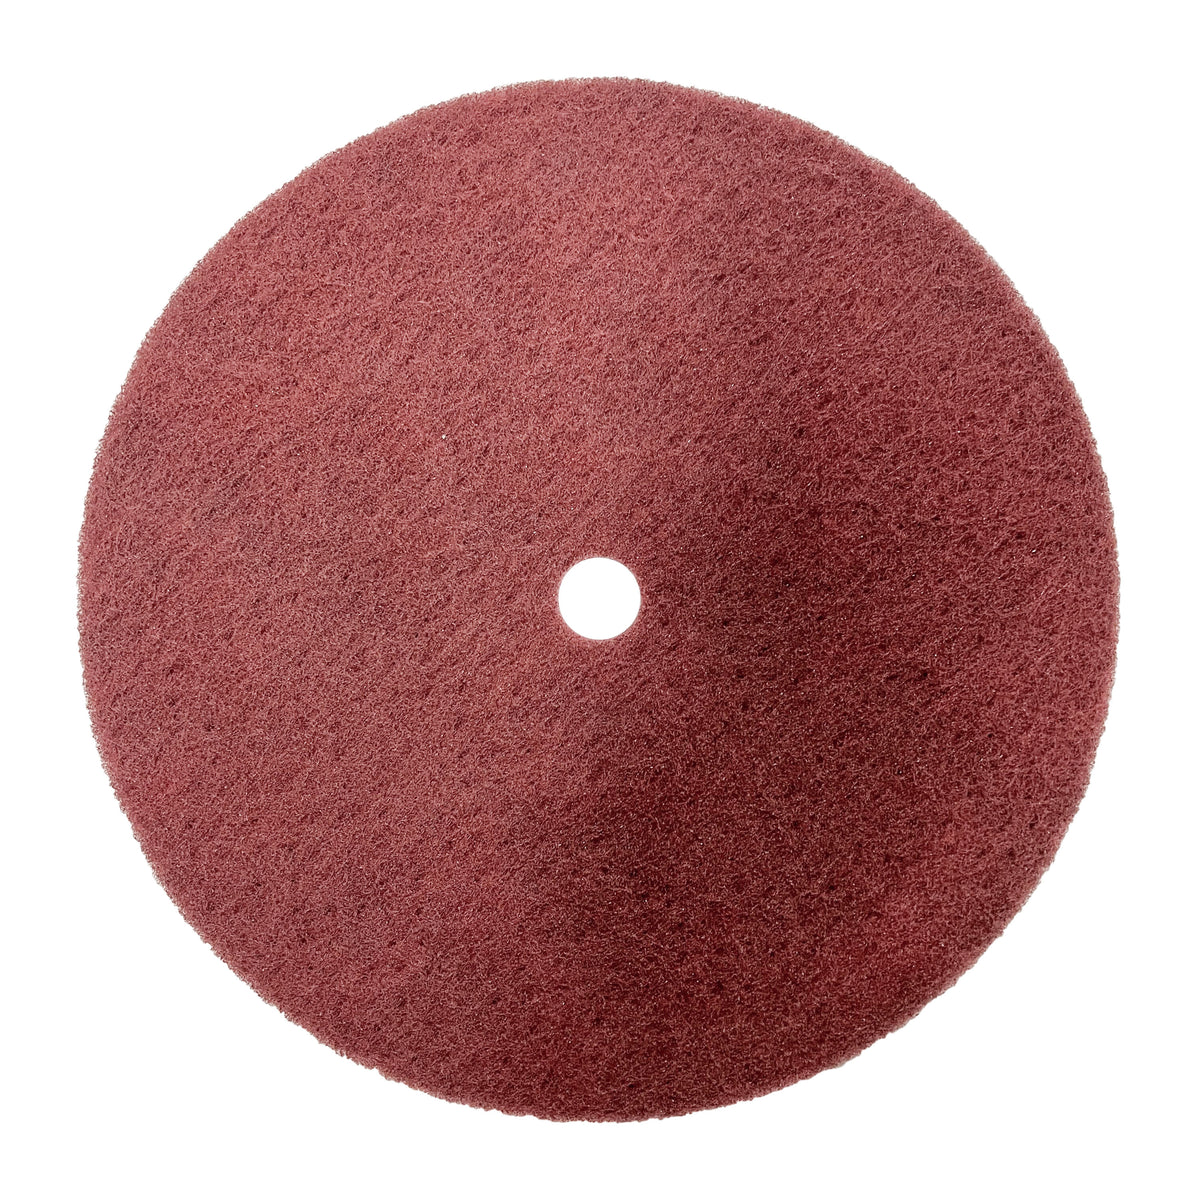 14&quot; one-ply satin buffing wheel with center plate, designed for polishing machines, enabling efficient and effective surface refinement